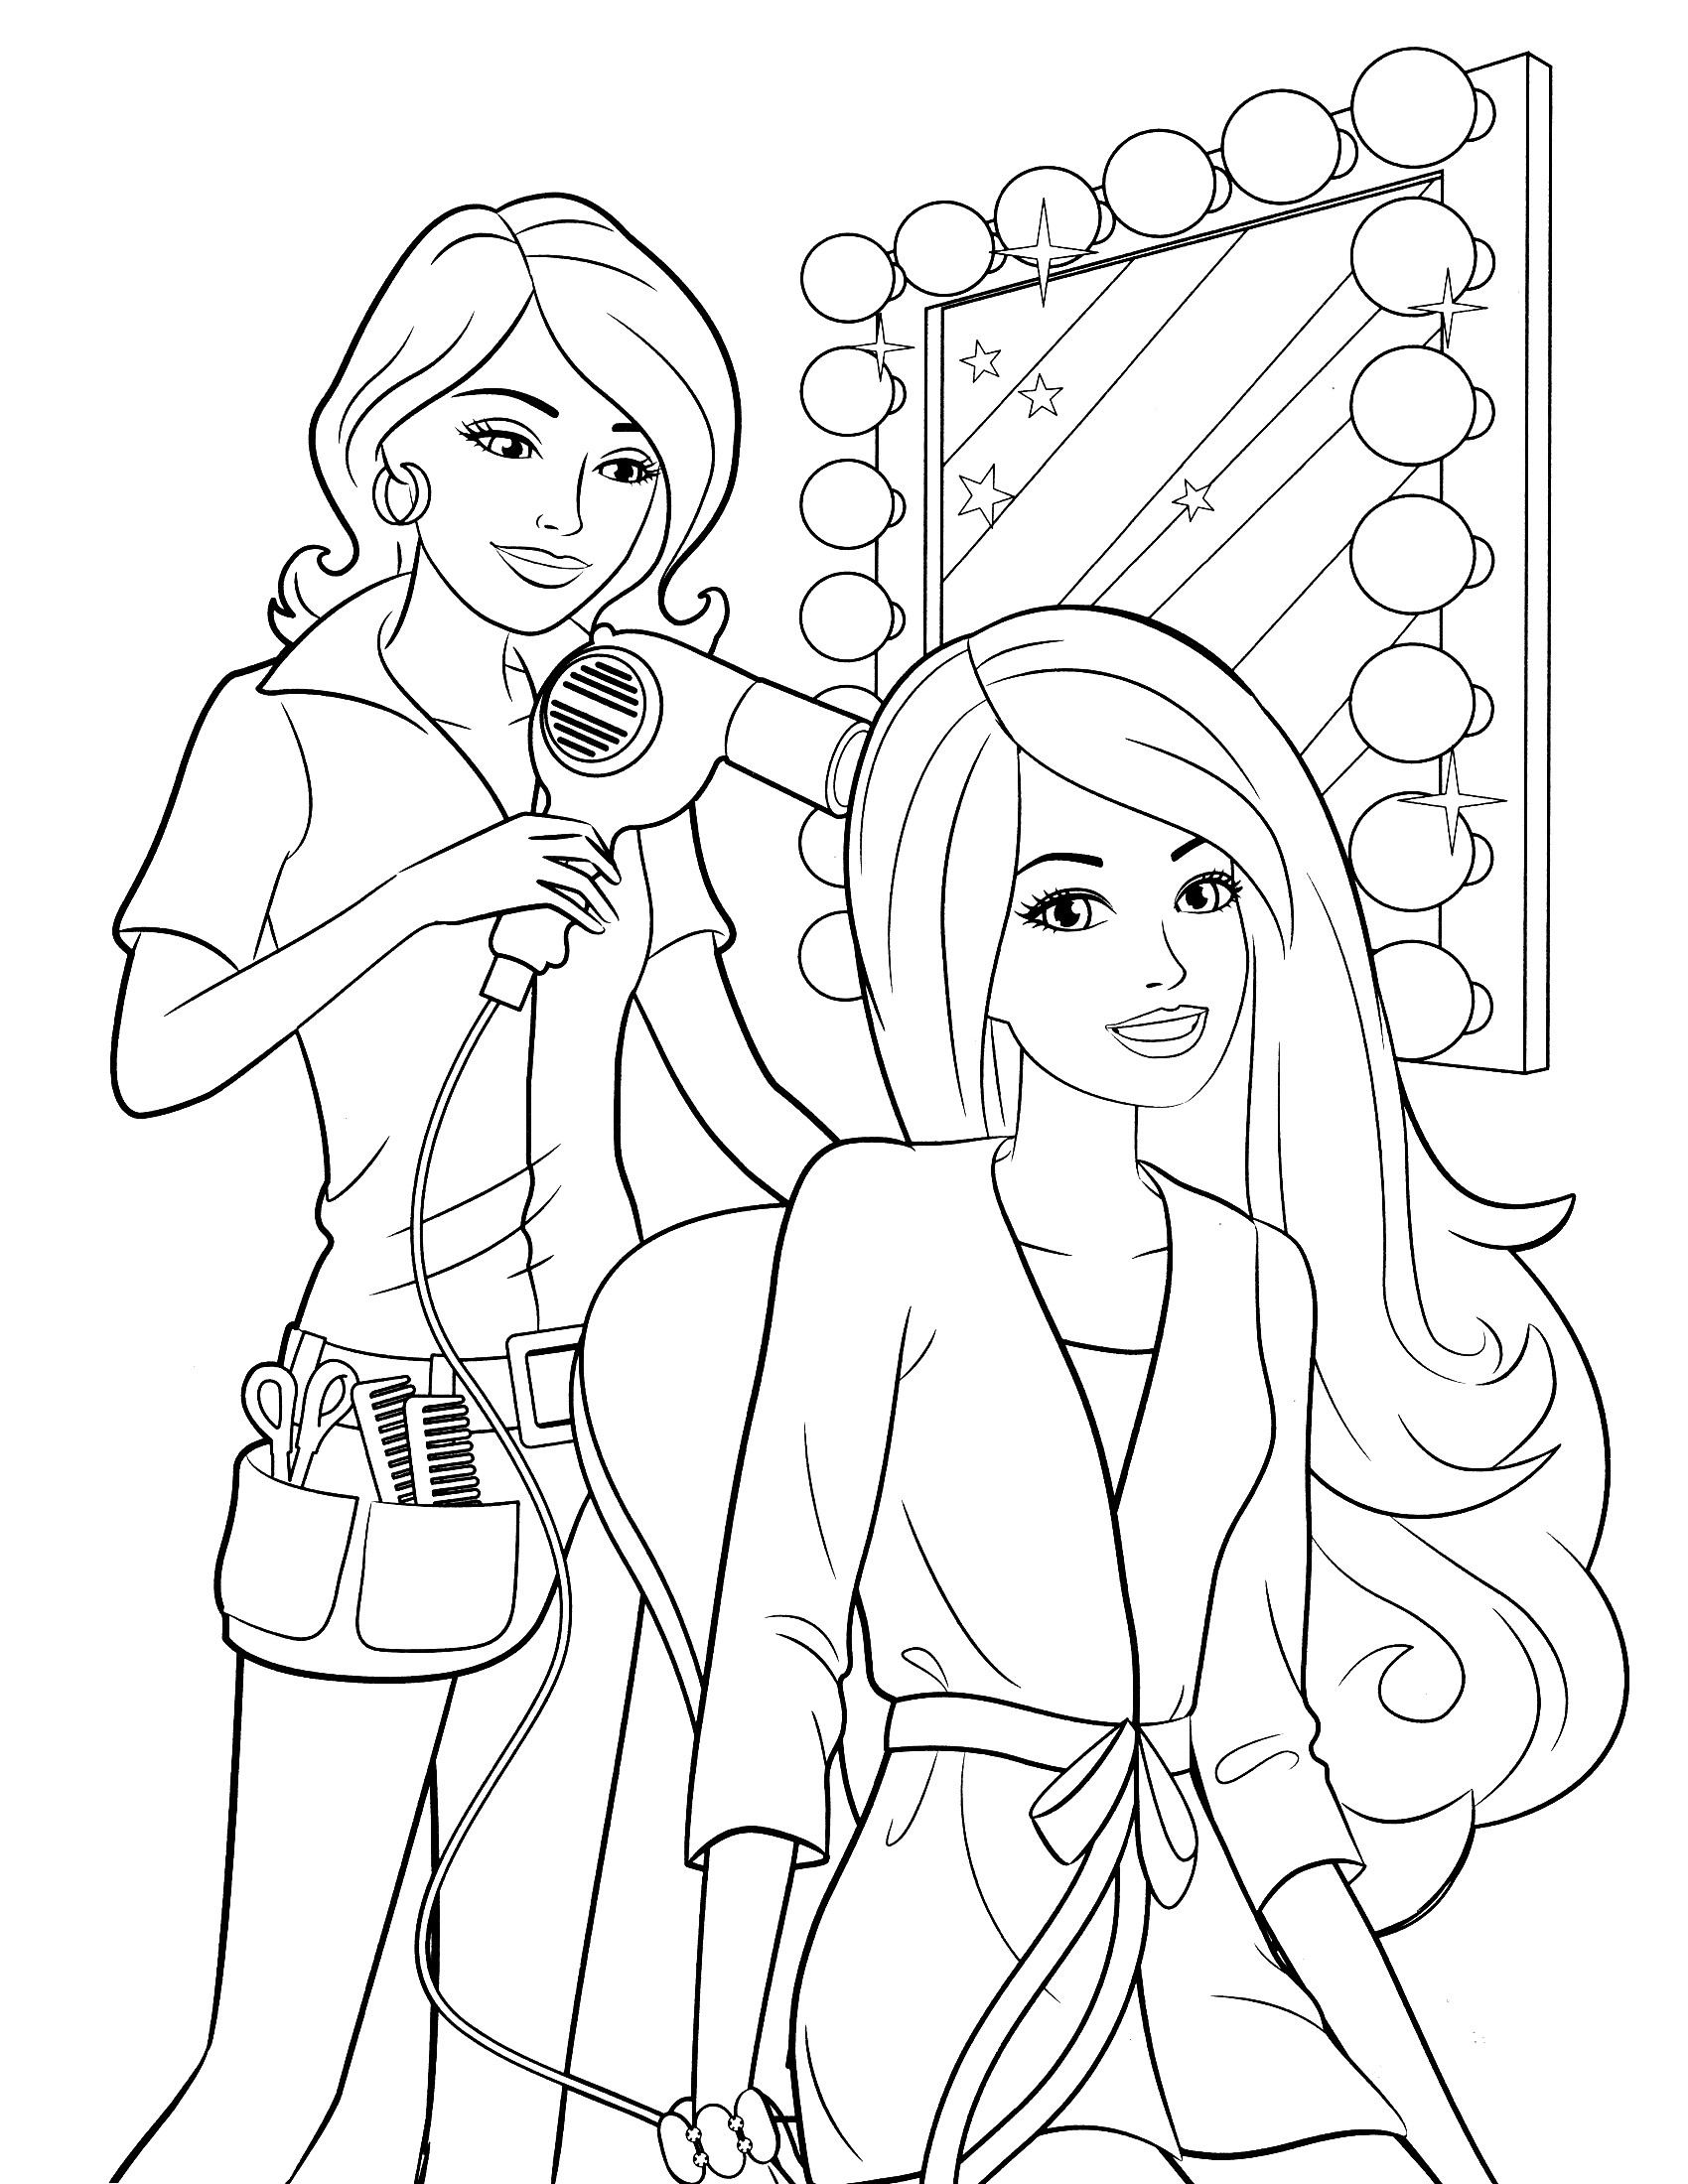 Free Girl Coloring Pages To Print
 Coloring Pages for Girls Best Coloring Pages For Kids